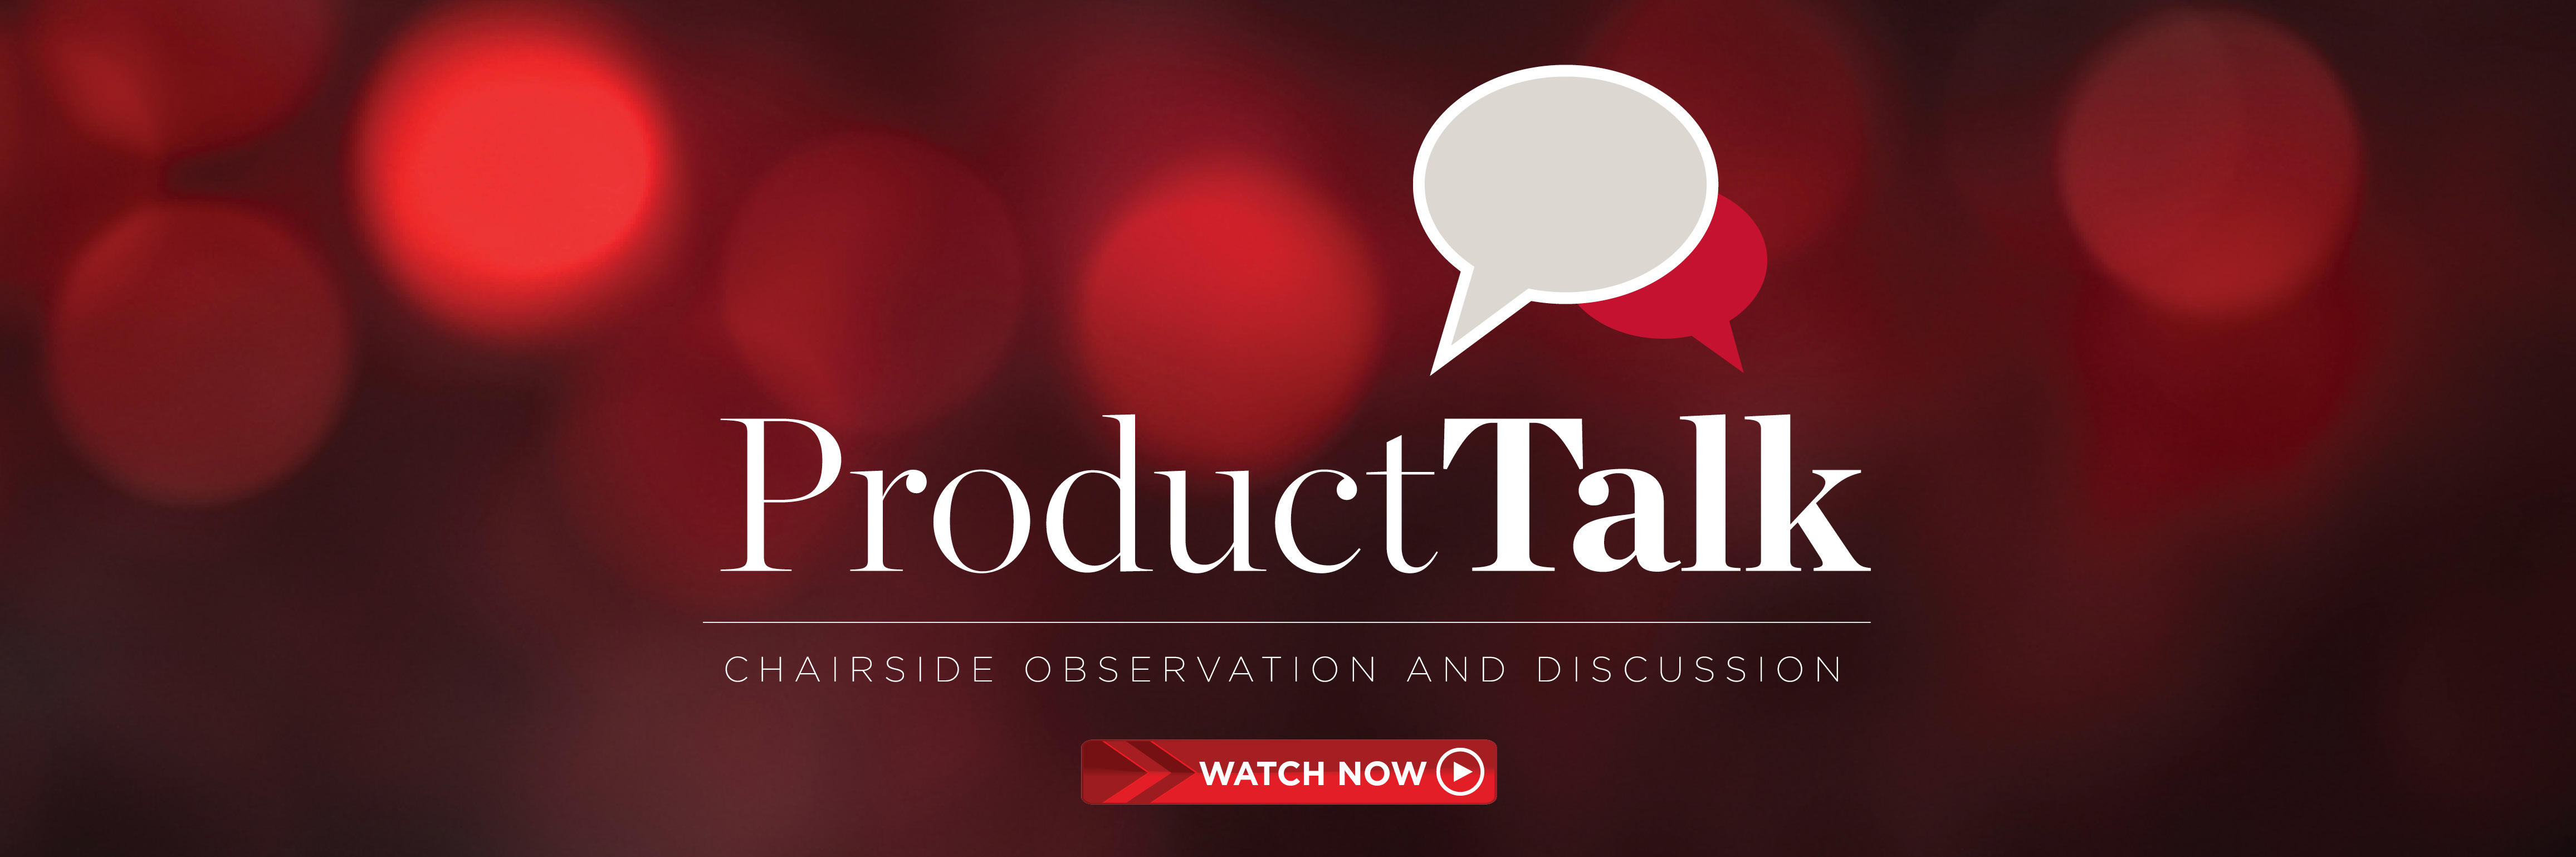 Product Talk Carousel Banner